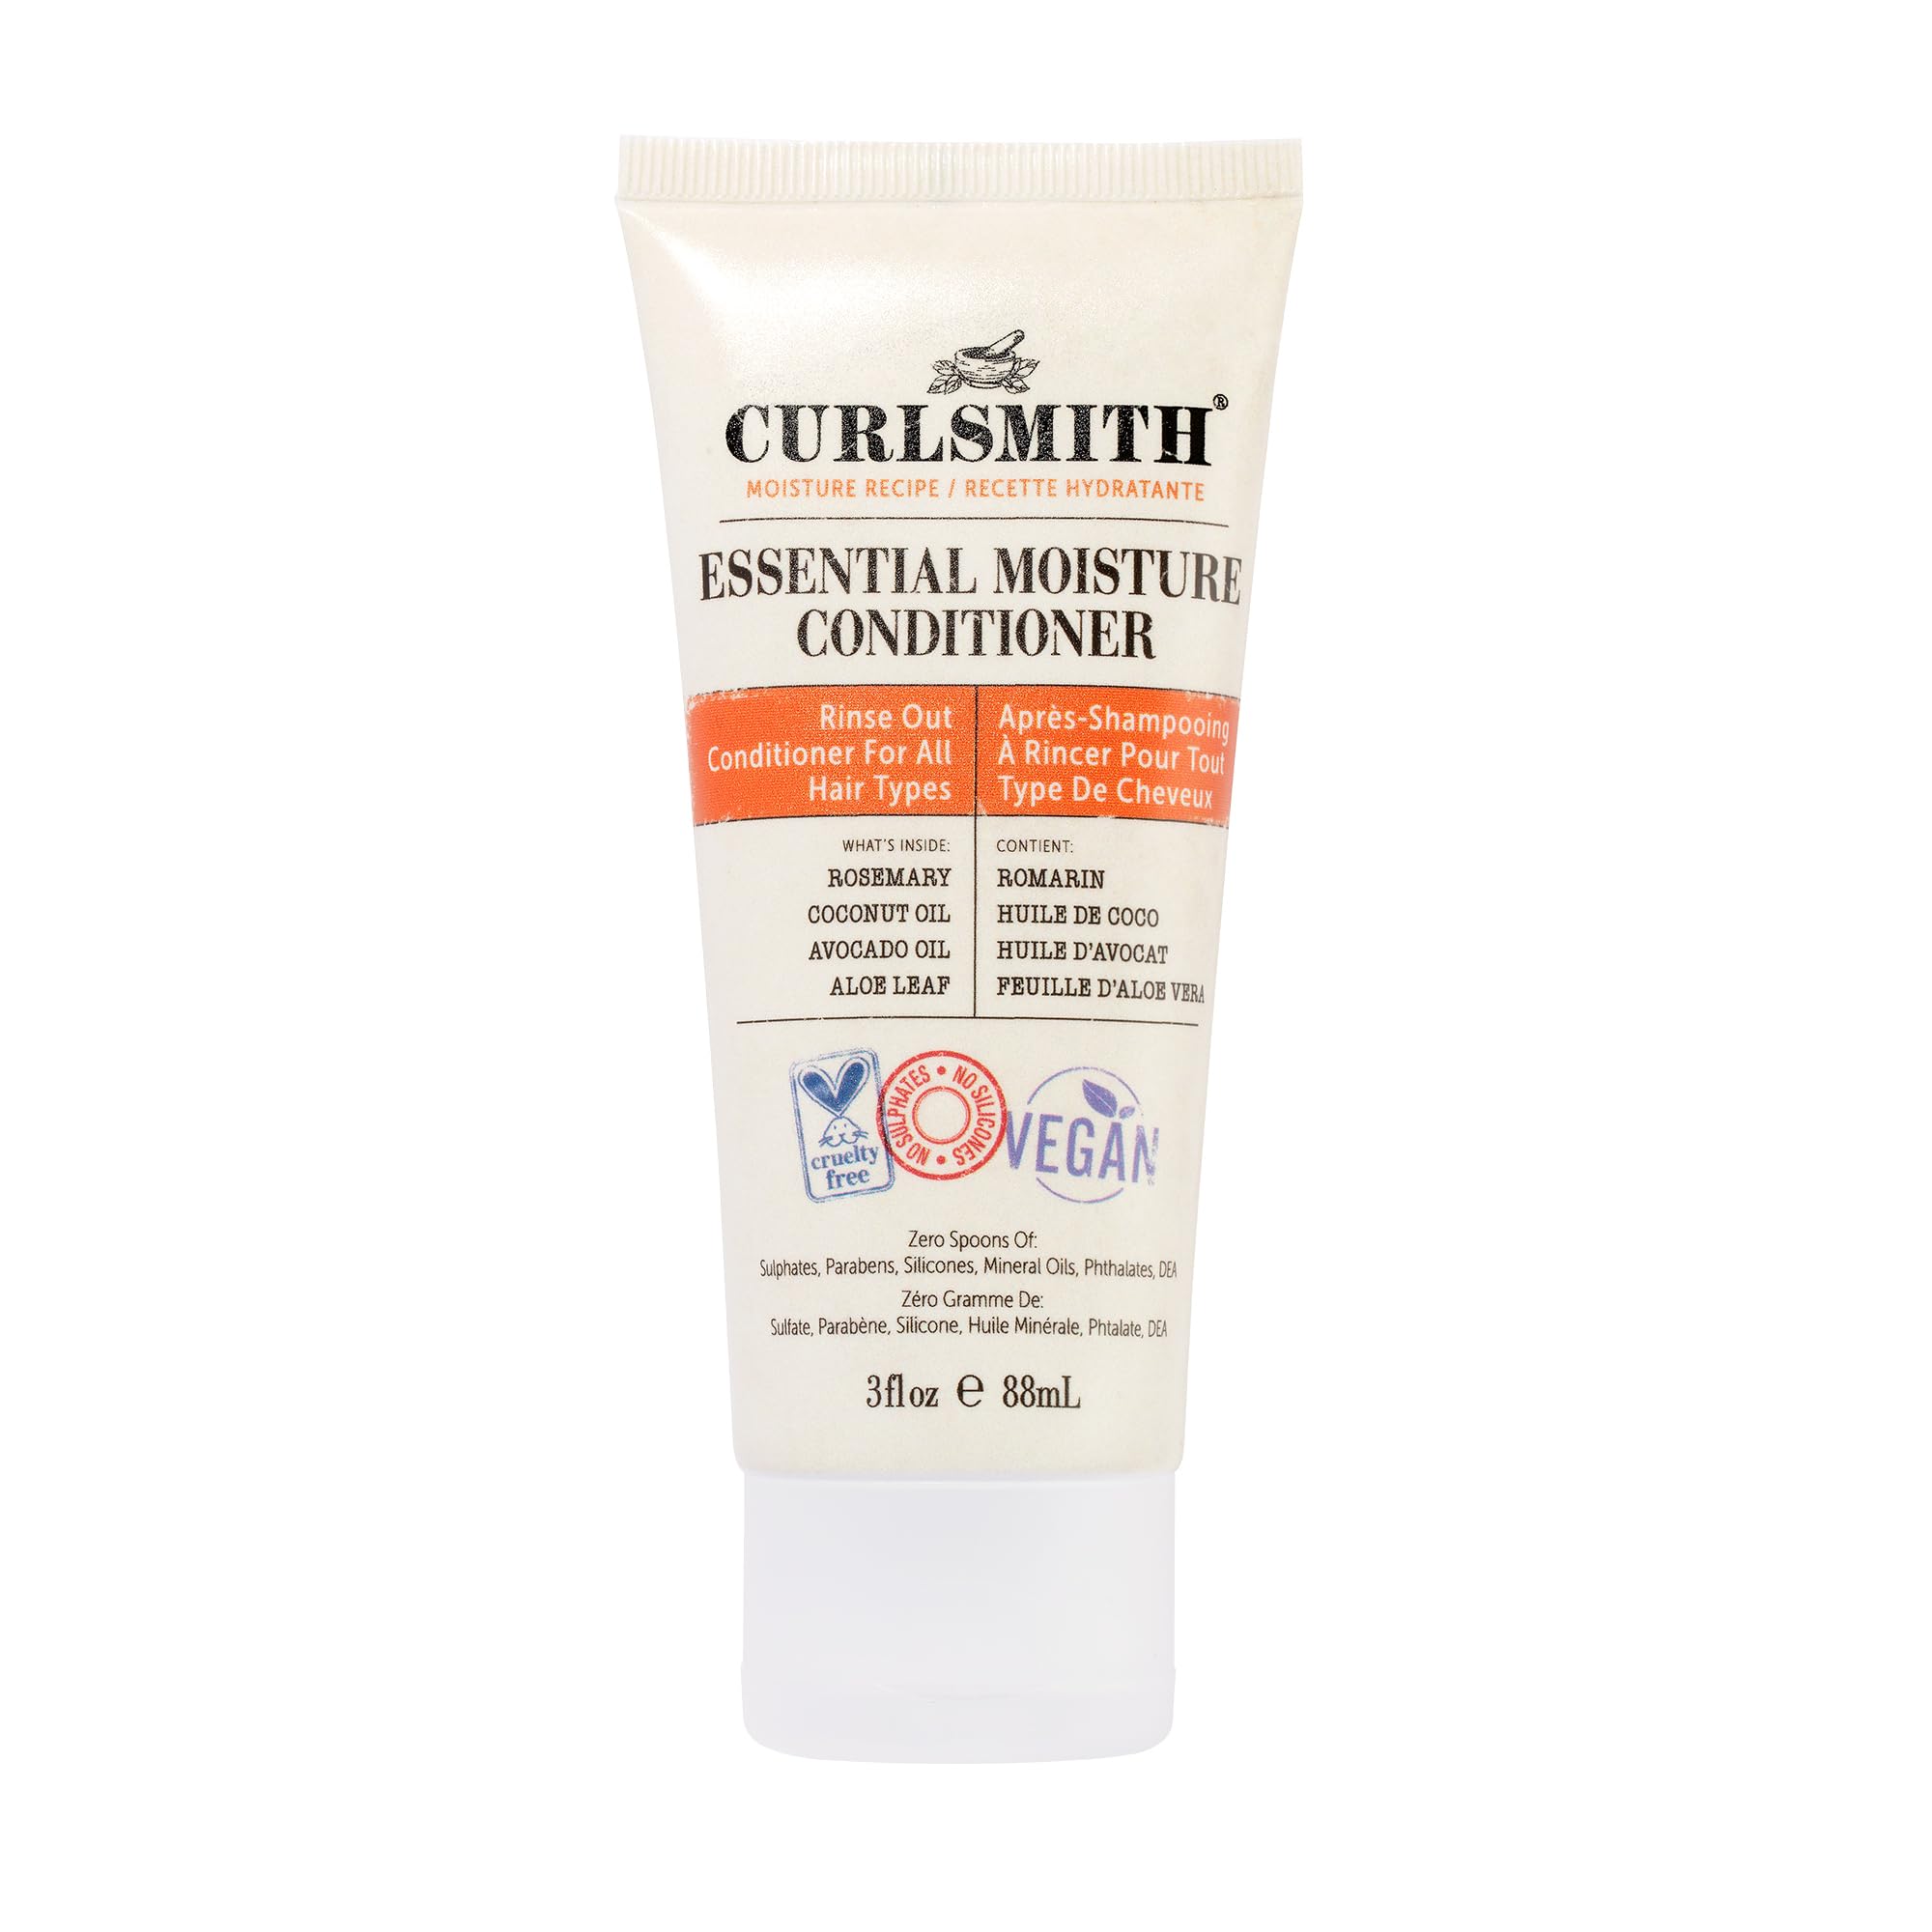 CURLSMITH - Essential Moisture Conditioner, Lightweight Frizz Control for Wavy, Curly and Coily Hair, Vegan (3 fl.oz)